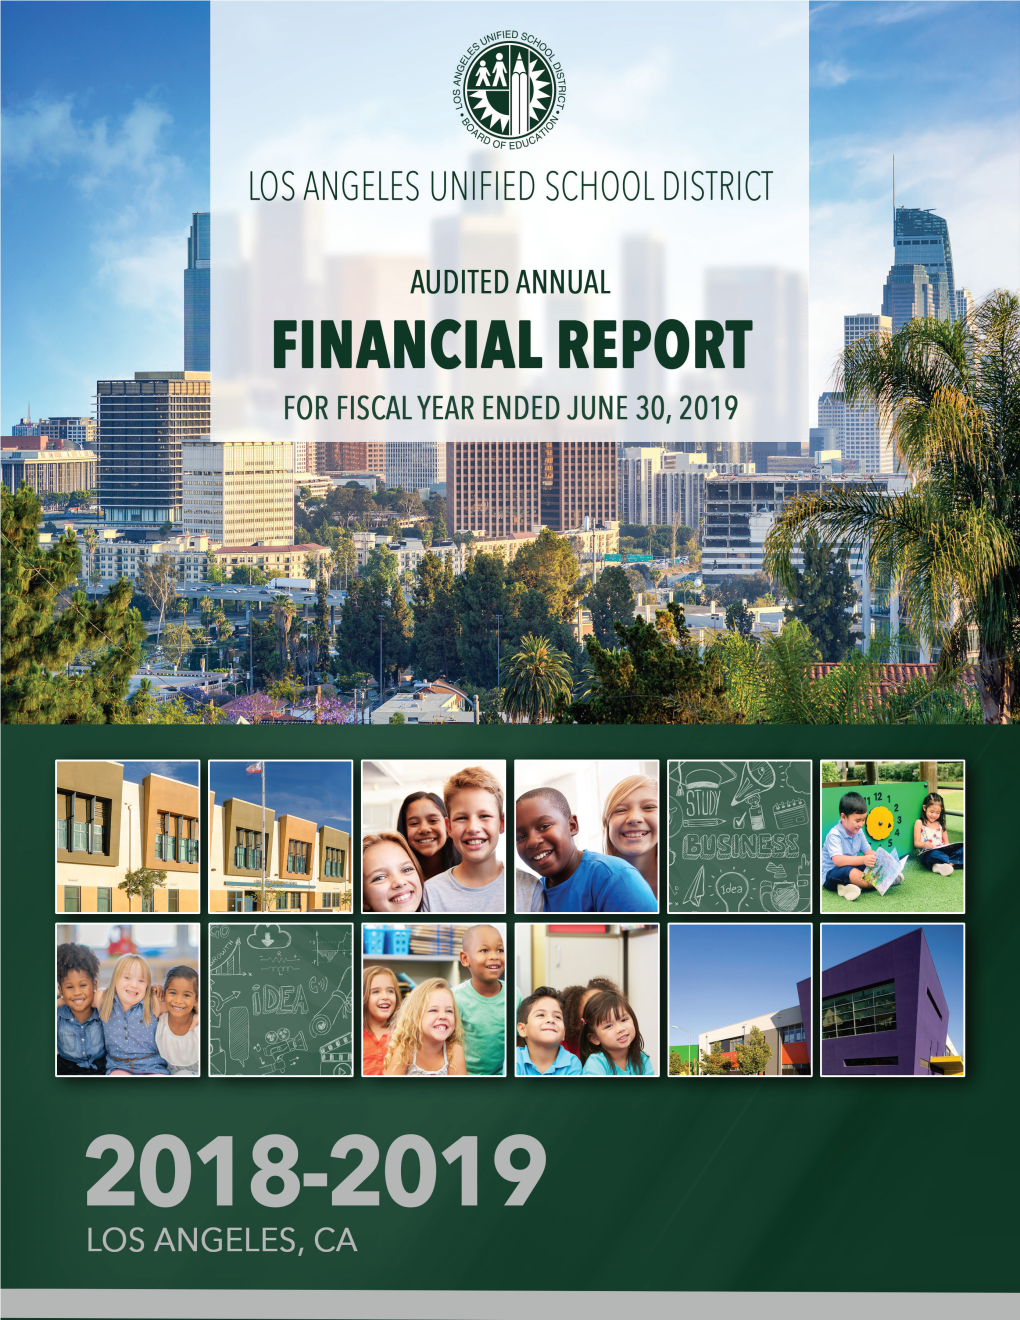 Audited Annual Financial Report Fiscal Year Ended June 30, 2019